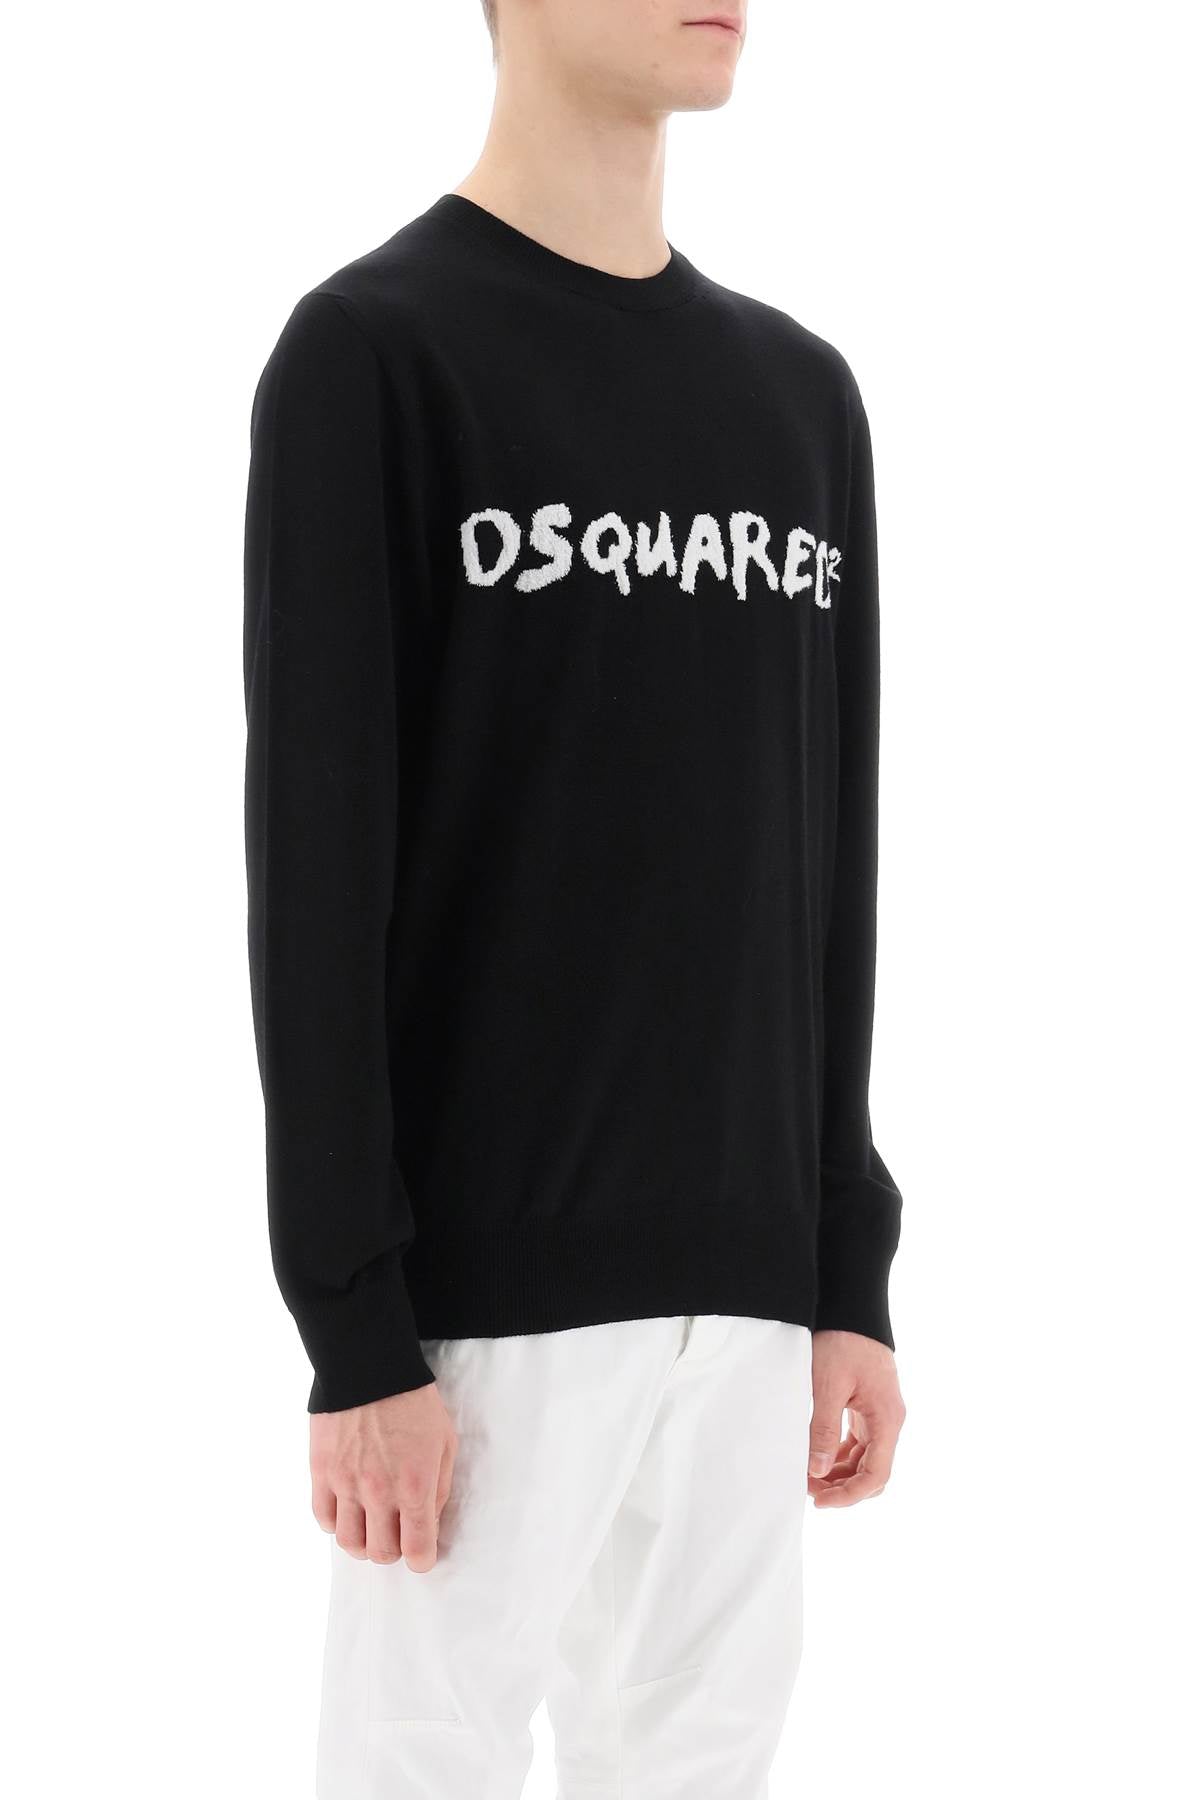 Dsquared2 textured logo sweater-1